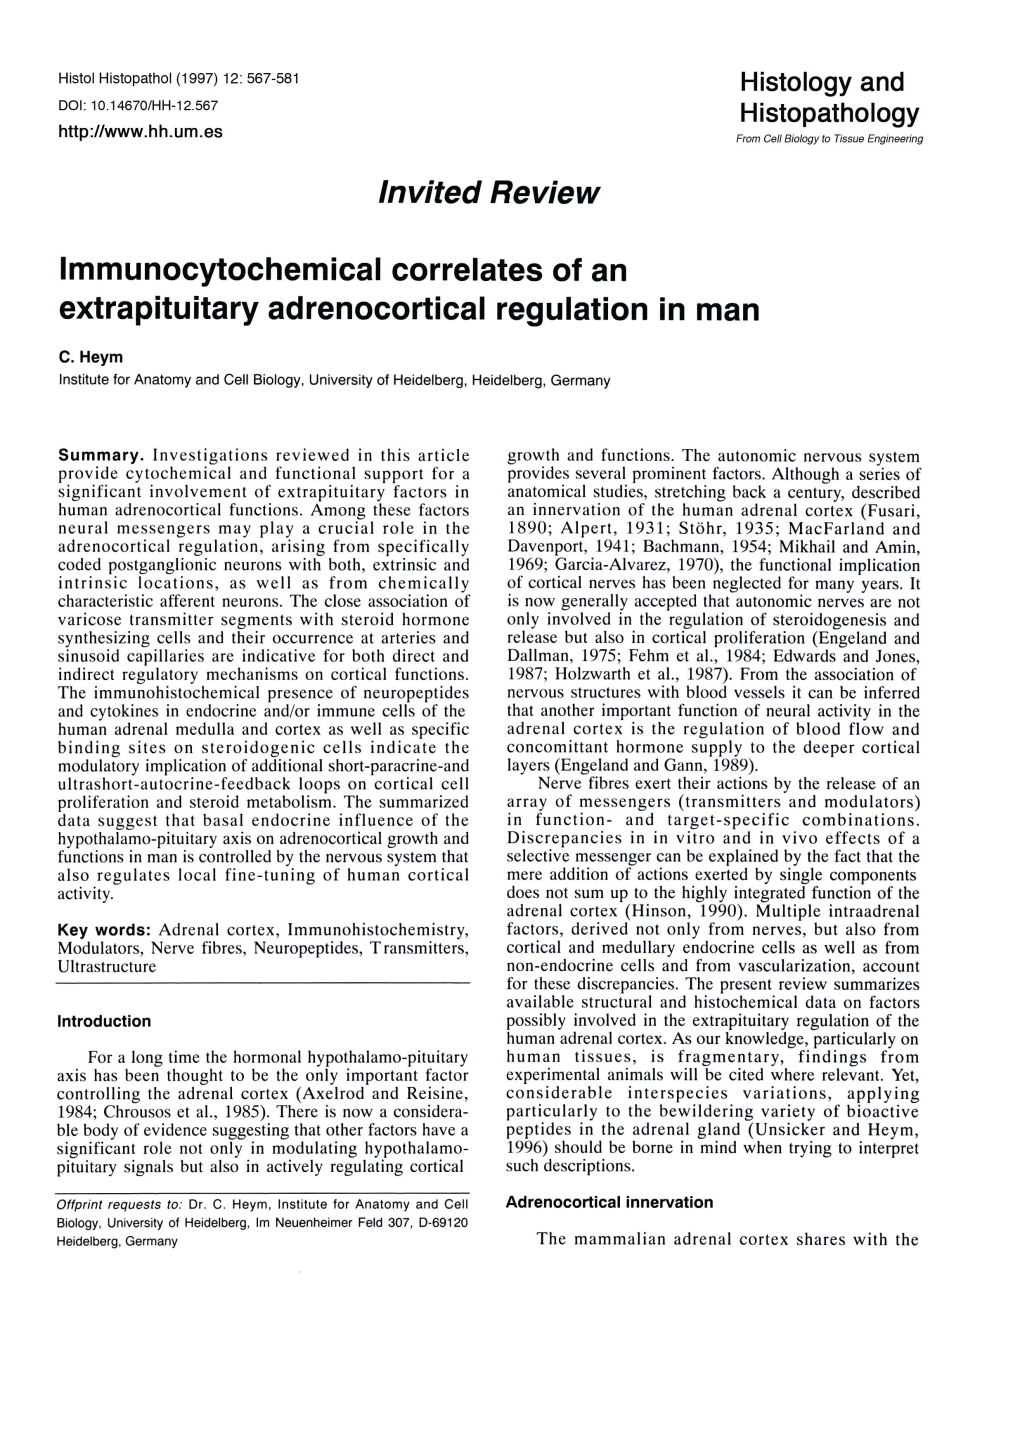 Invited Review Immunocytochemical Correlates of an Extrapituitary